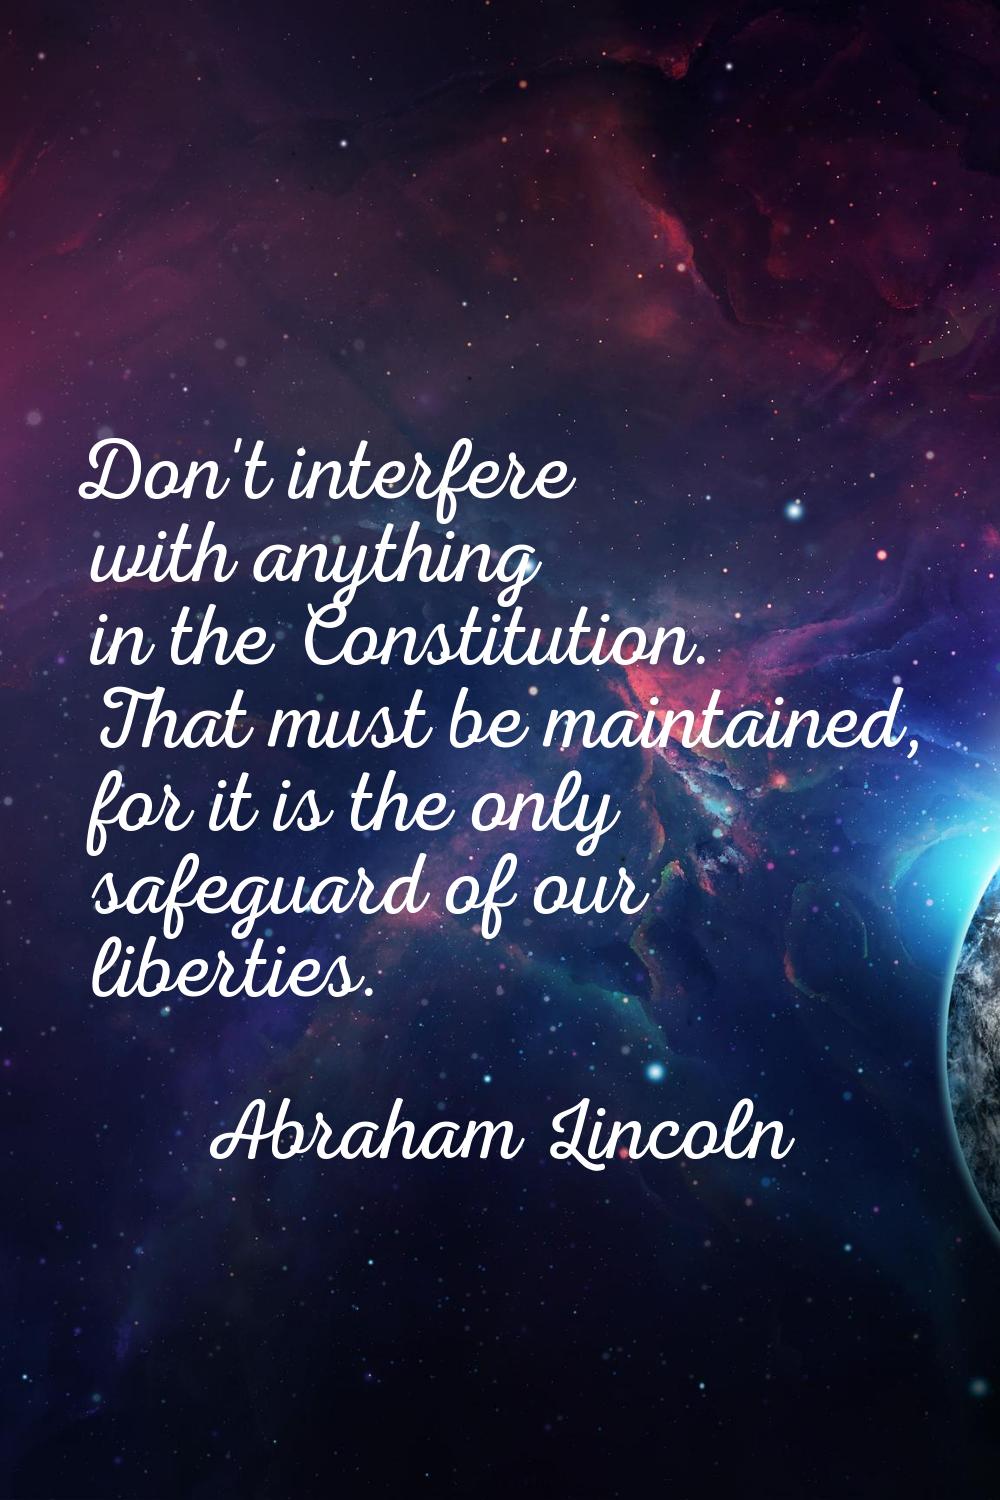 Don't interfere with anything in the Constitution. That must be maintained, for it is the only safe